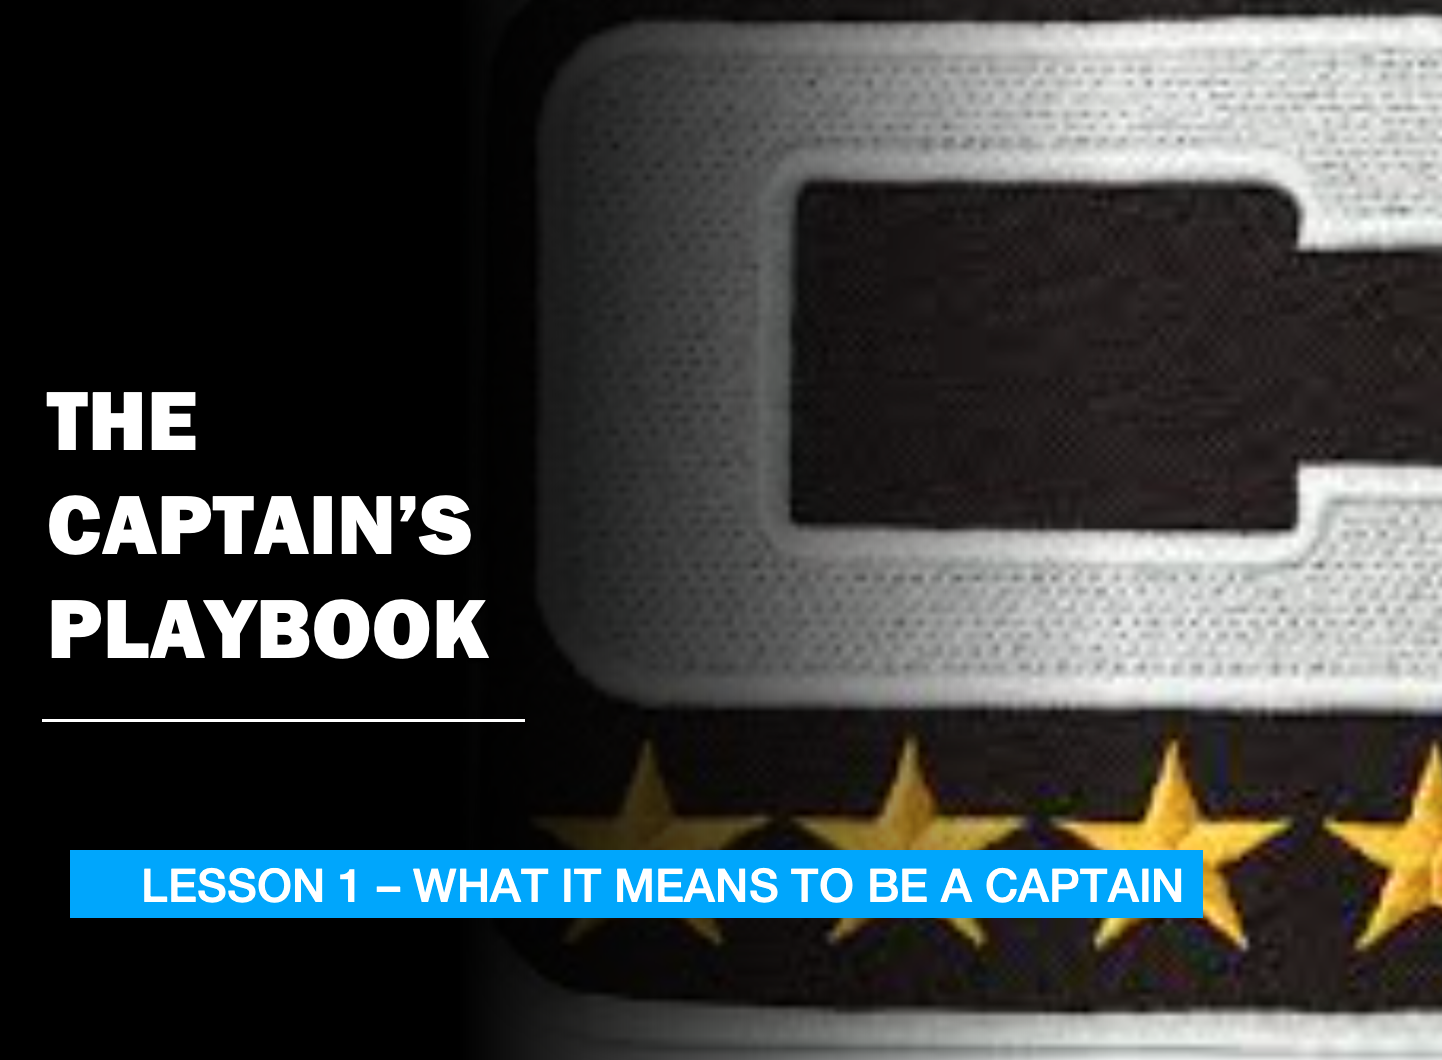 THE CAPTAIN'S PLAYBOOK - LESSON 1